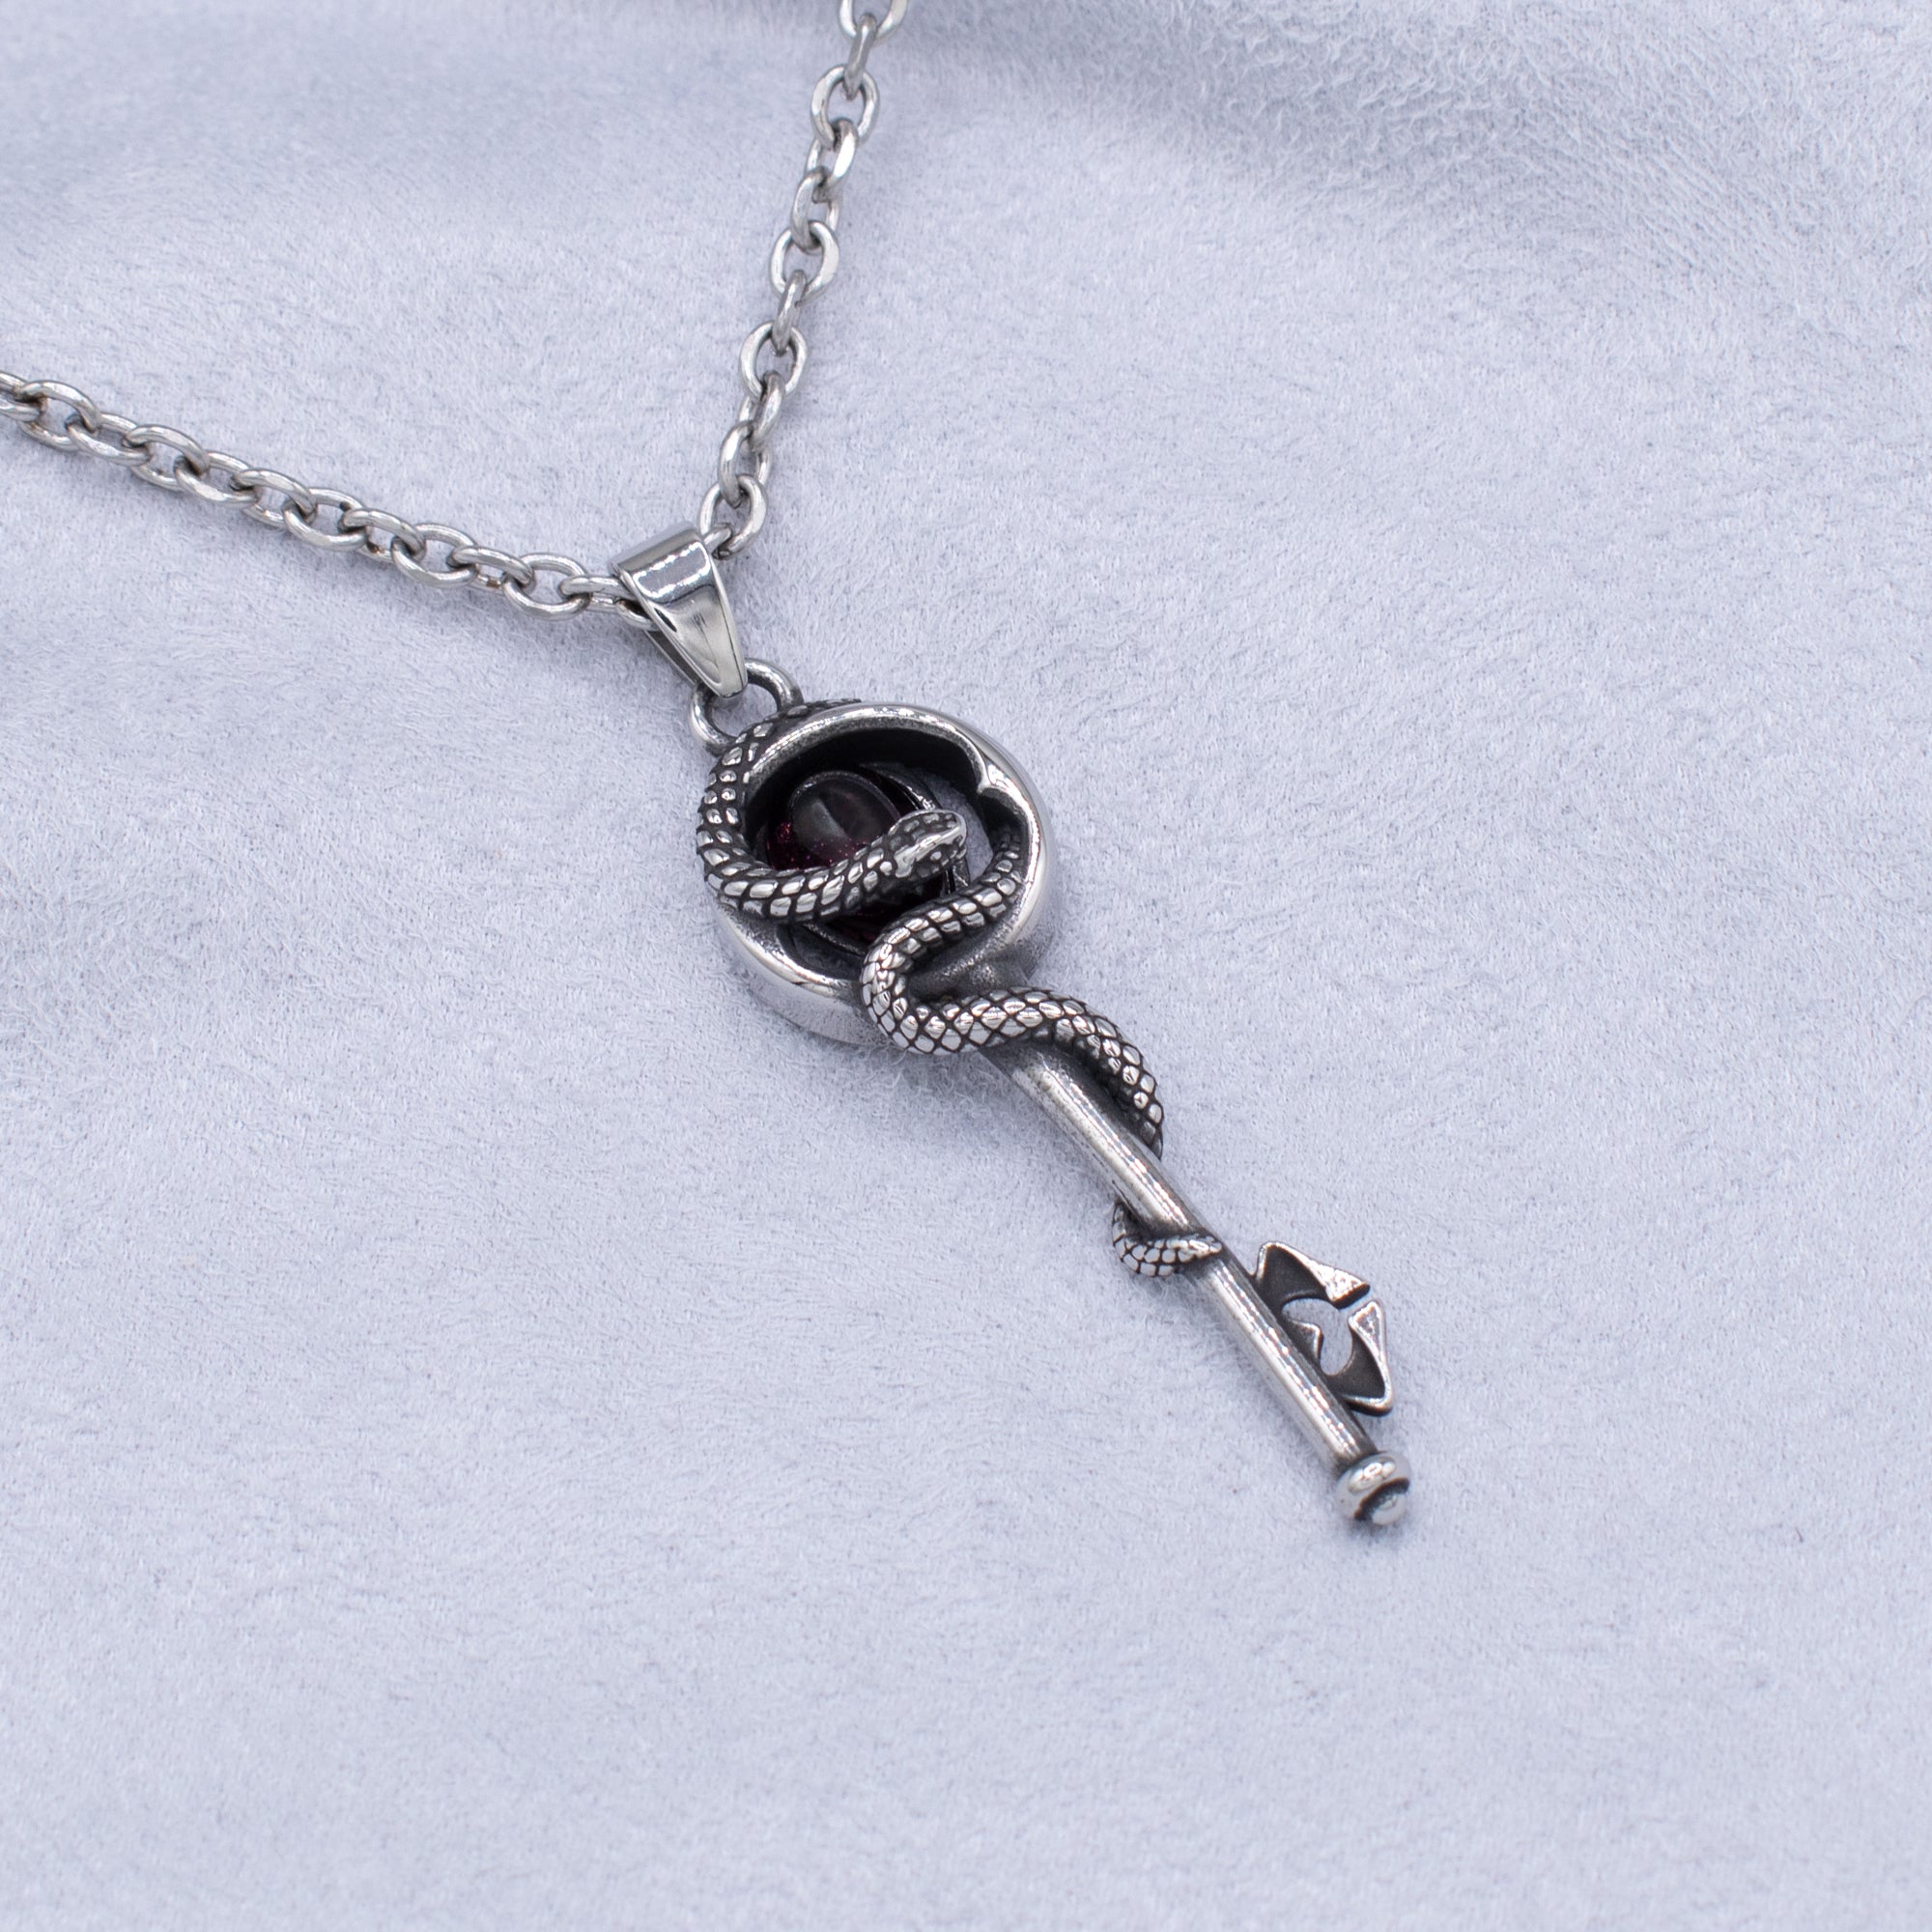 The Key Holder Serpent Pendant Necklace (Silver)